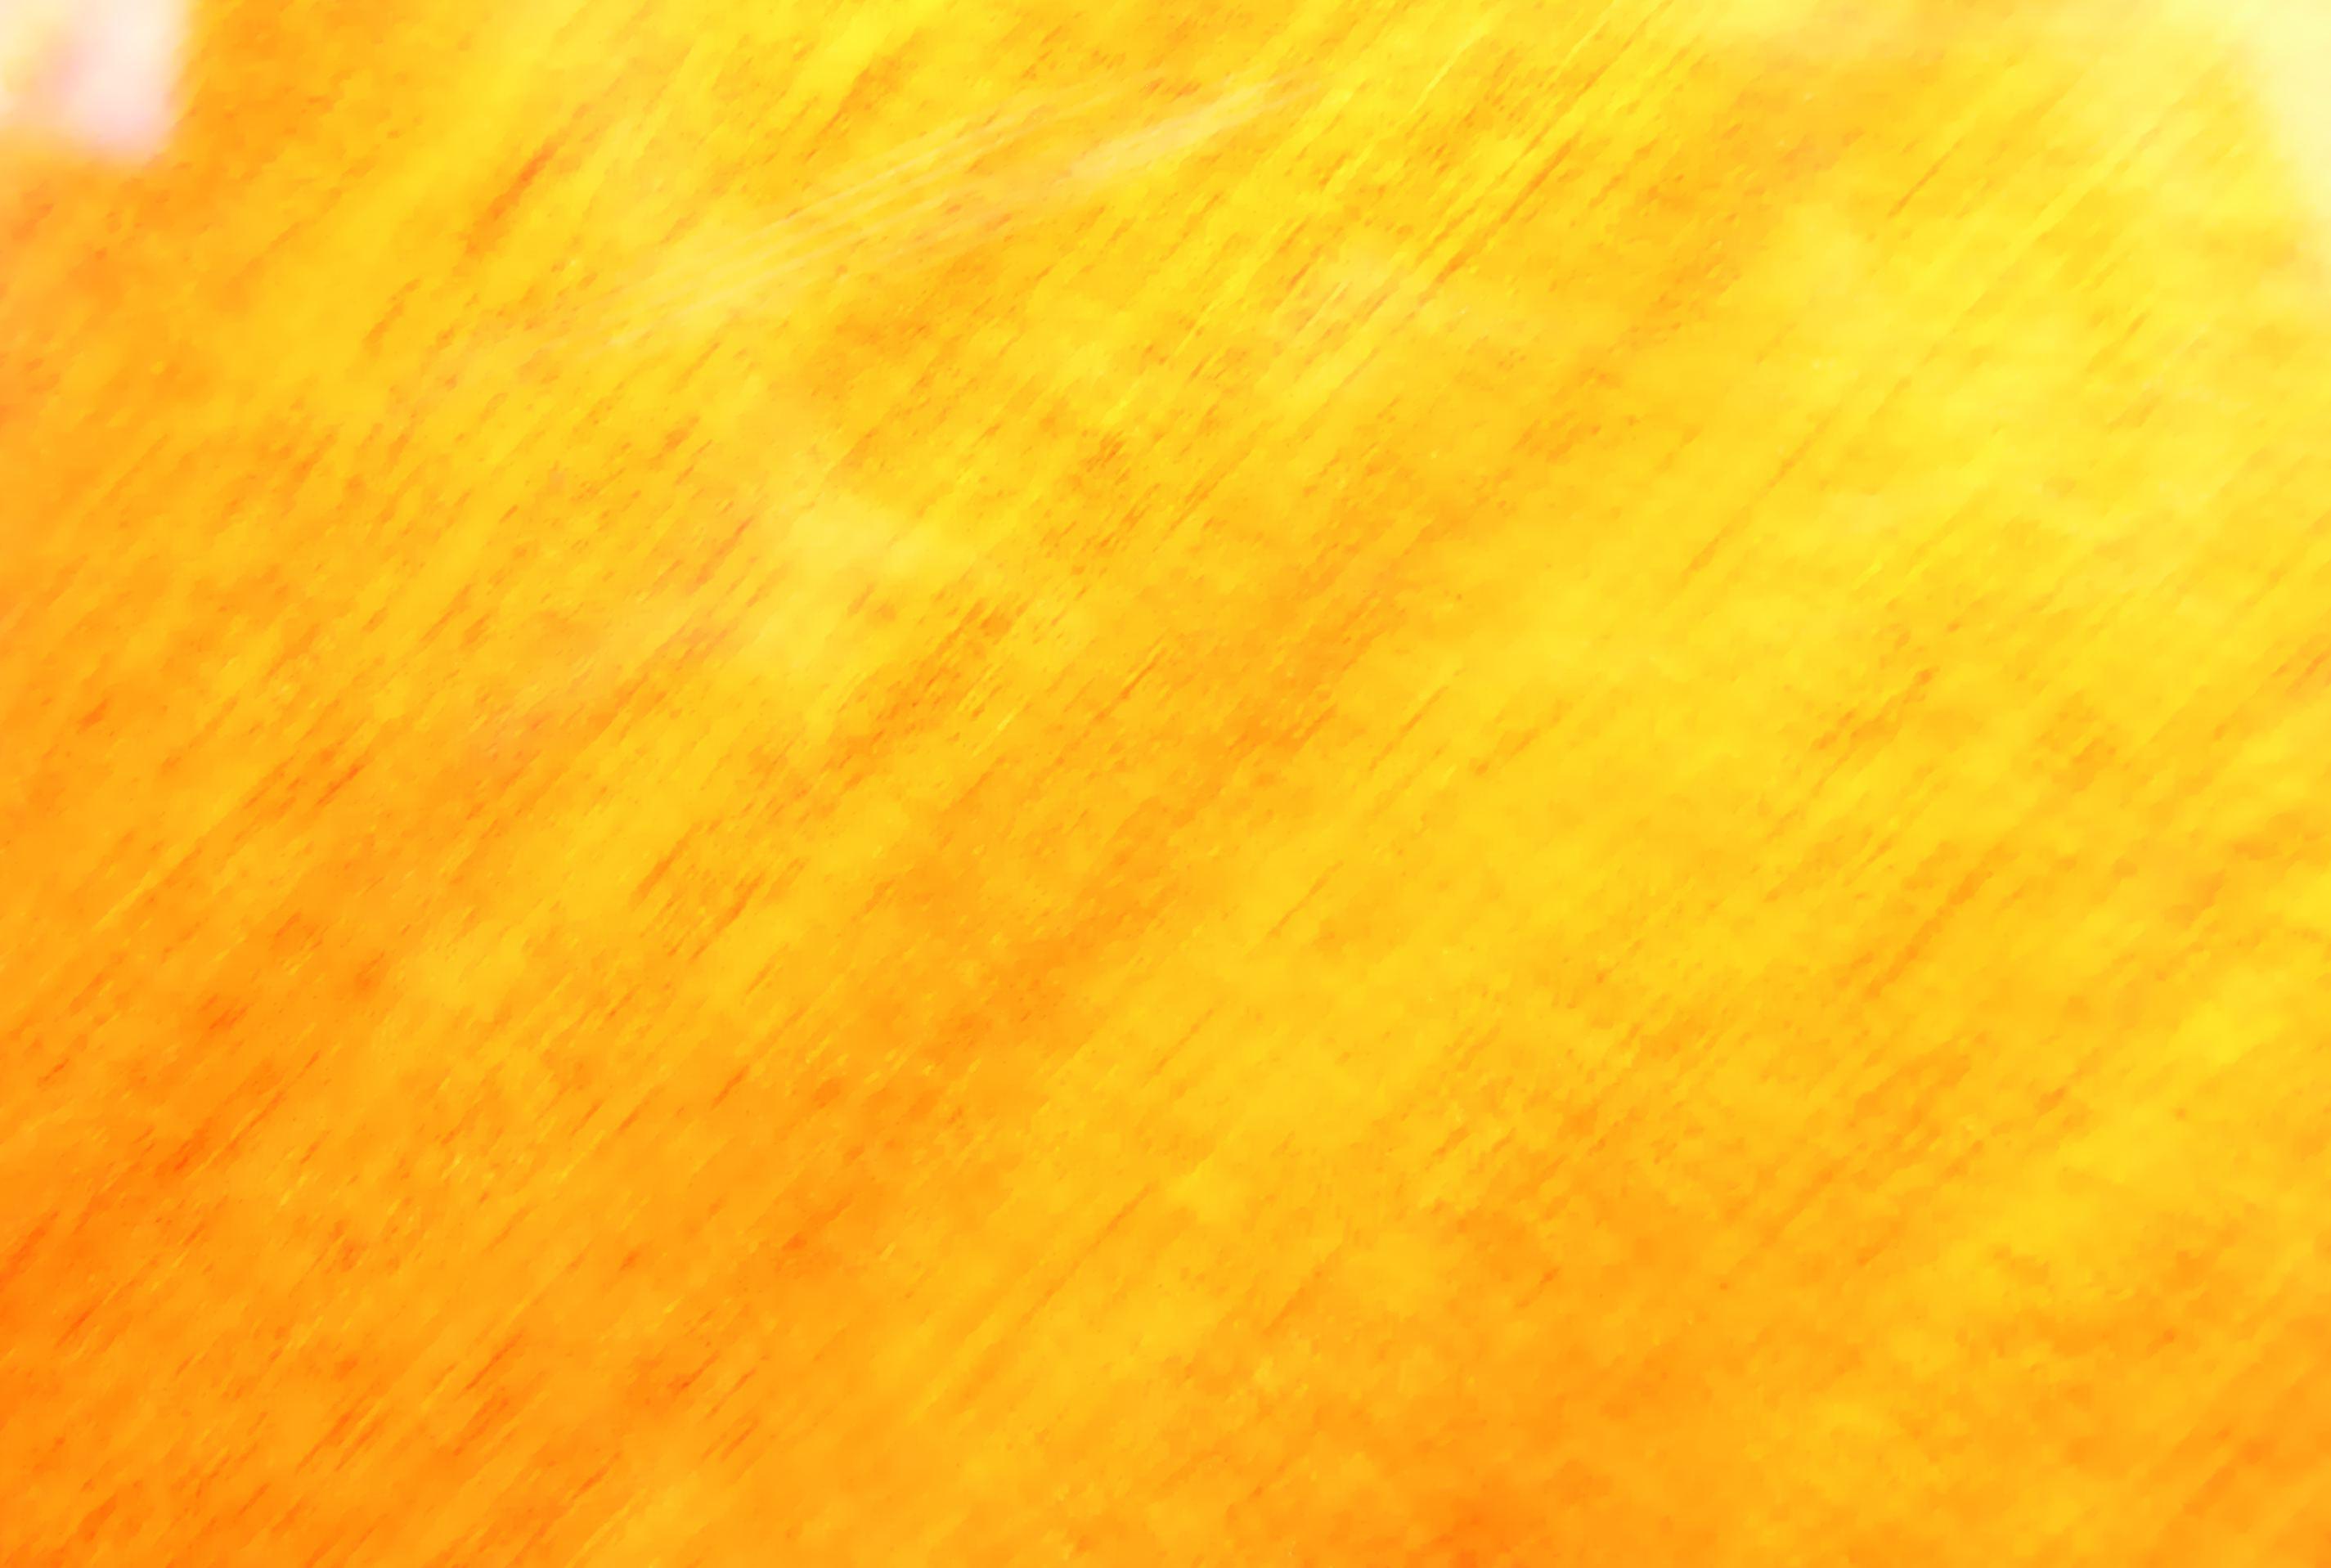 Yellow Backgrounds Image - Wallpaper Cave - 2850 x 1917 jpeg 206kB